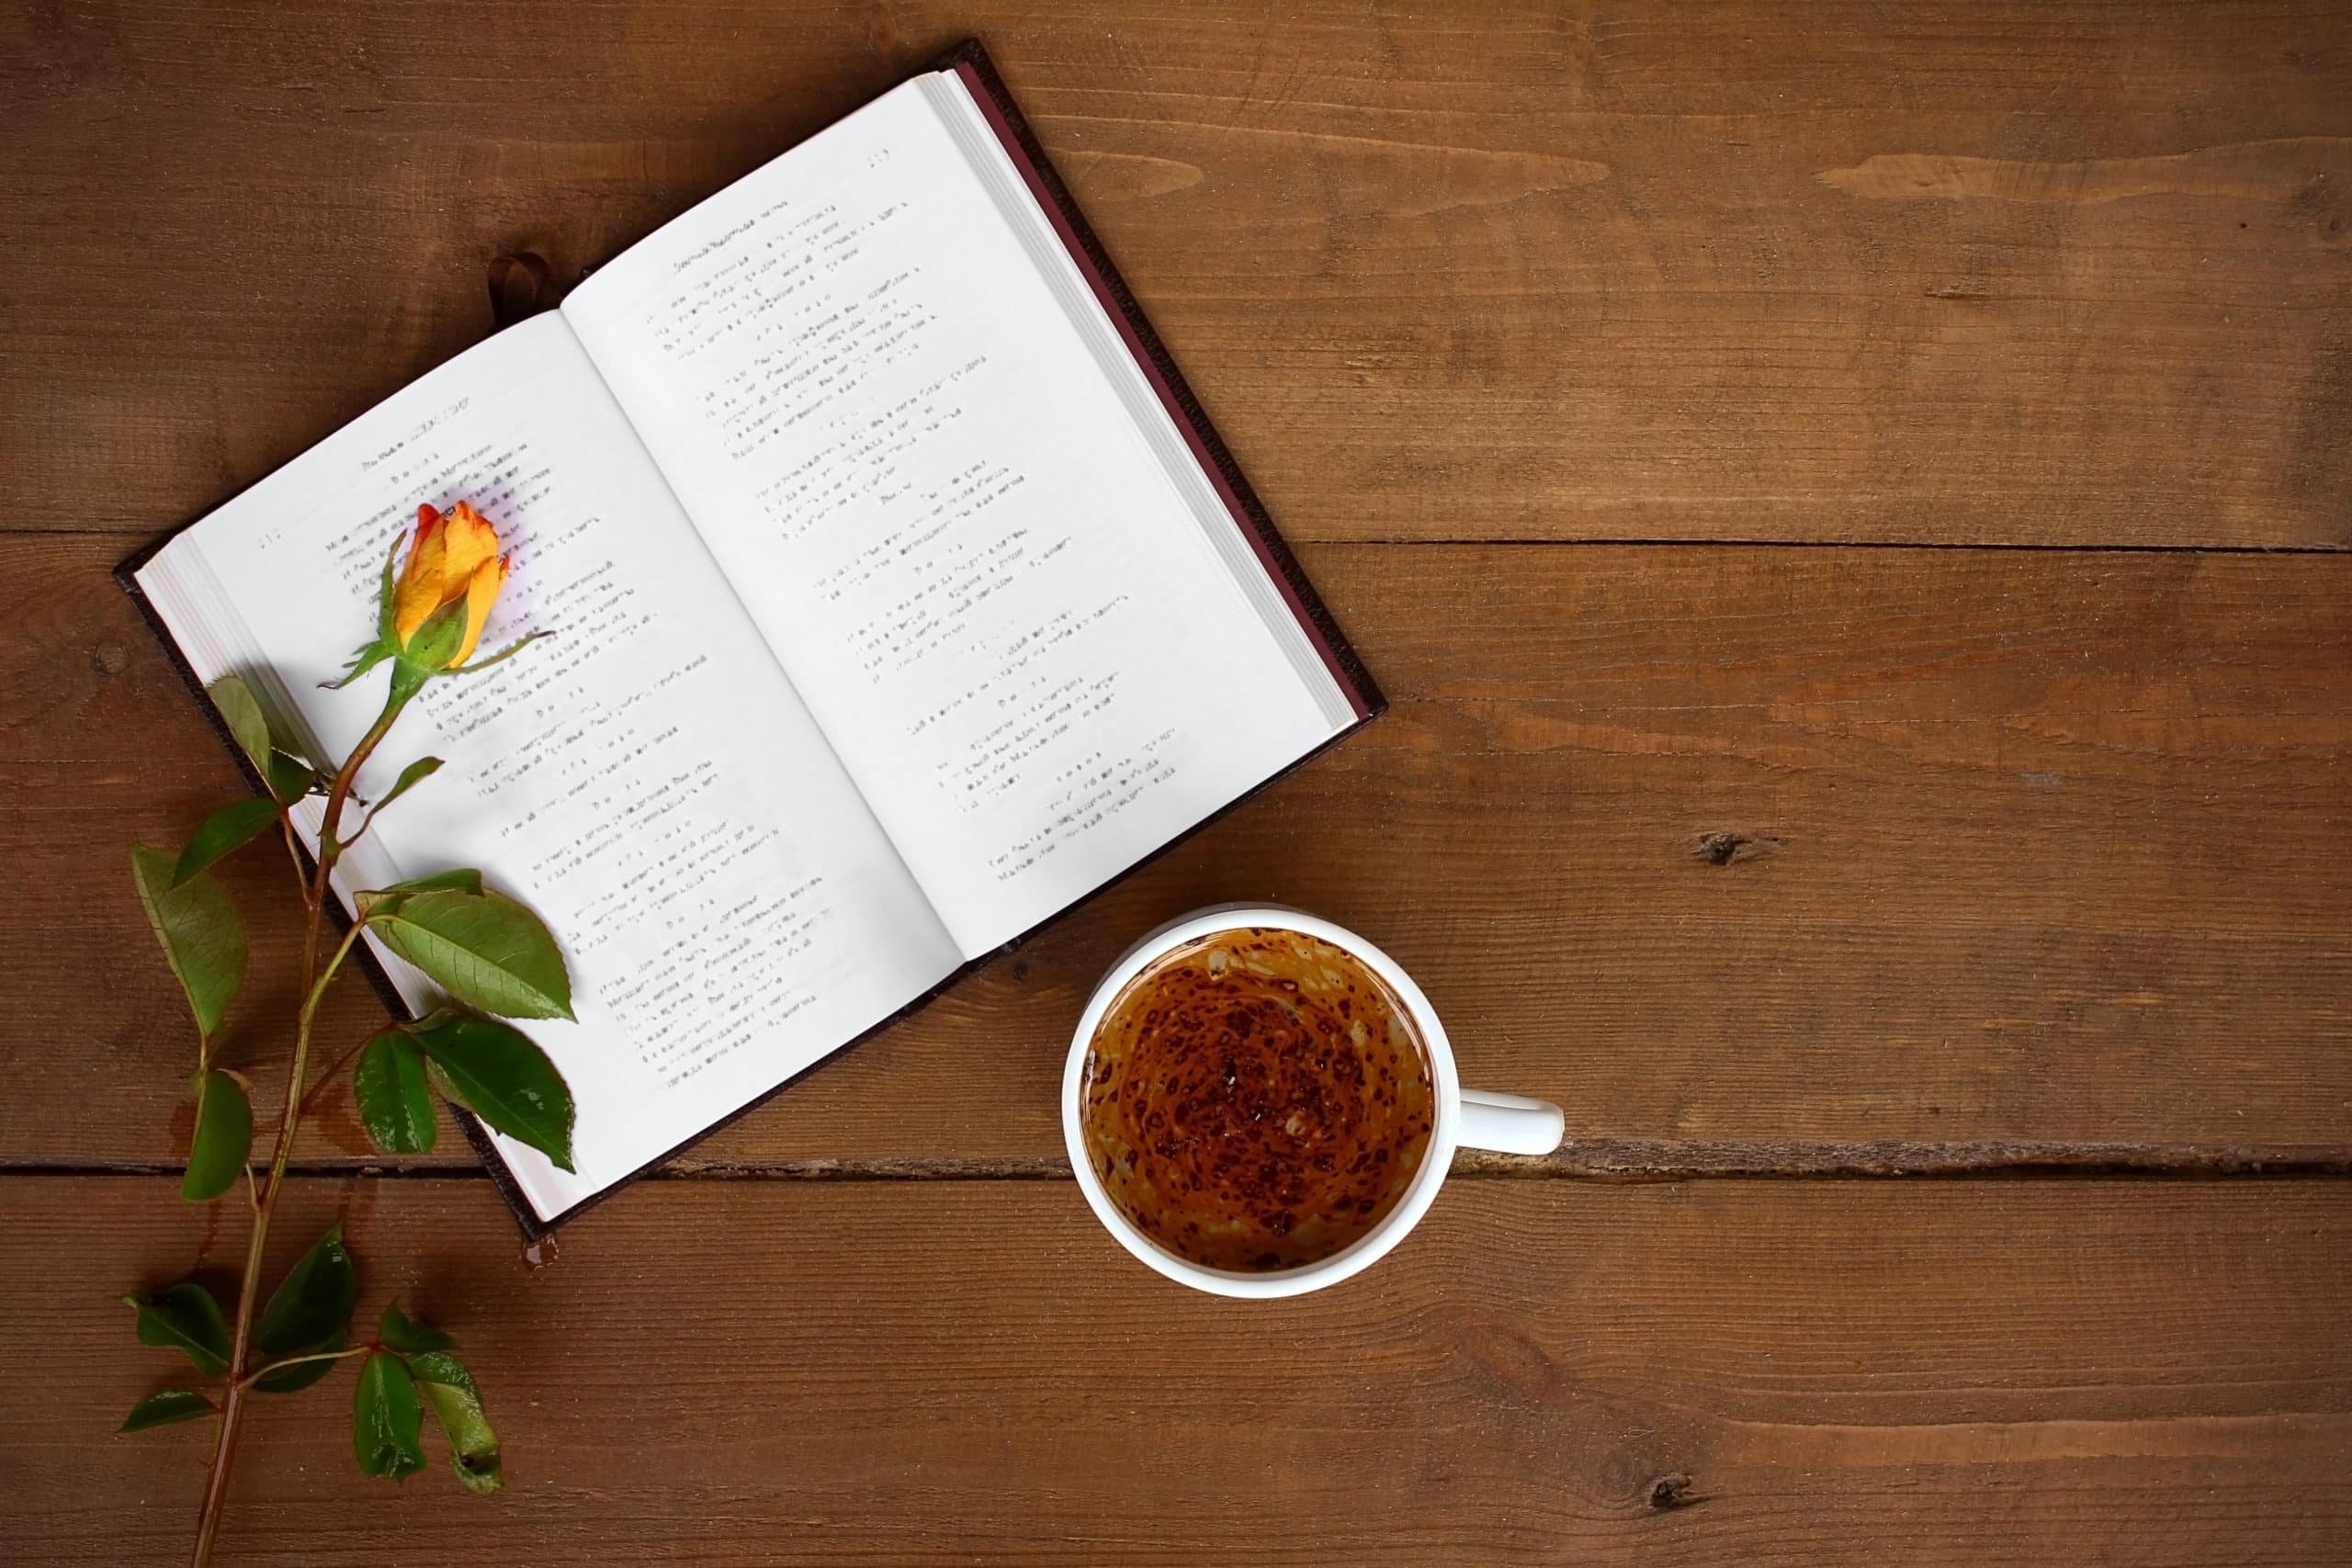 On a wooden background, an open book, next to a rose and a cup of tea.